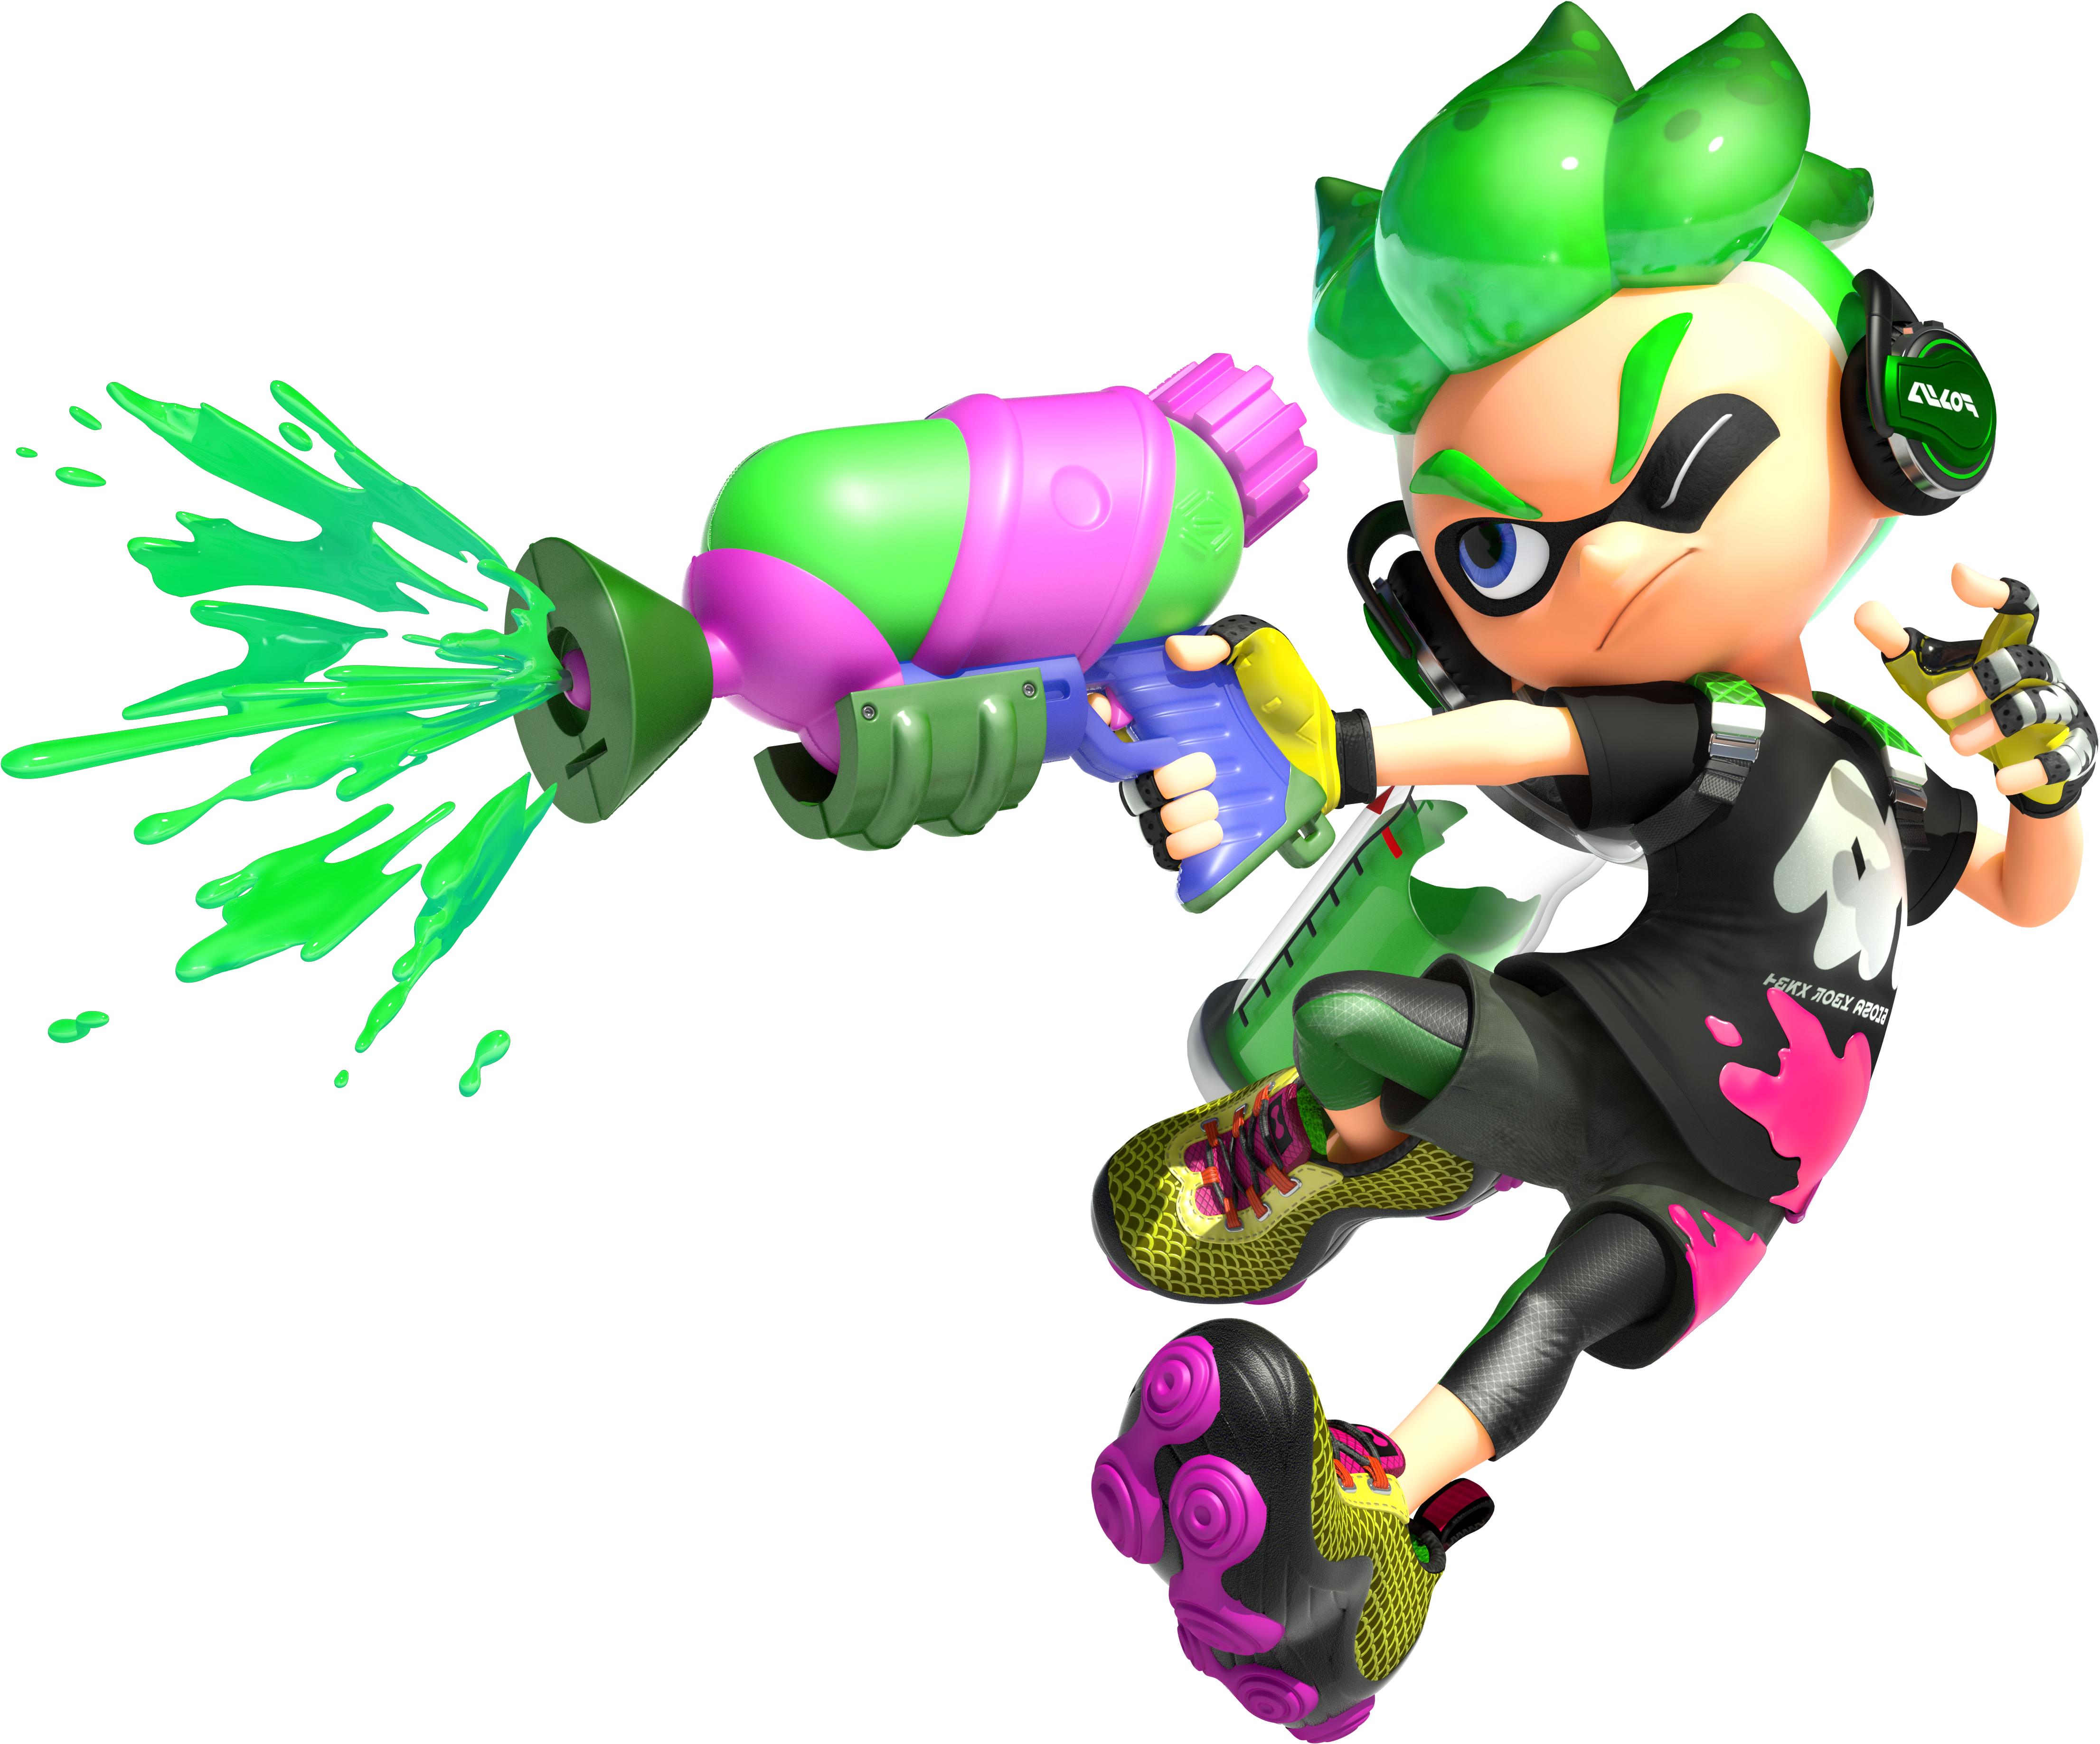 Fine Art Is A Celebration Of The Work Of Video Game - Splatoon 2 Inkling Bo...